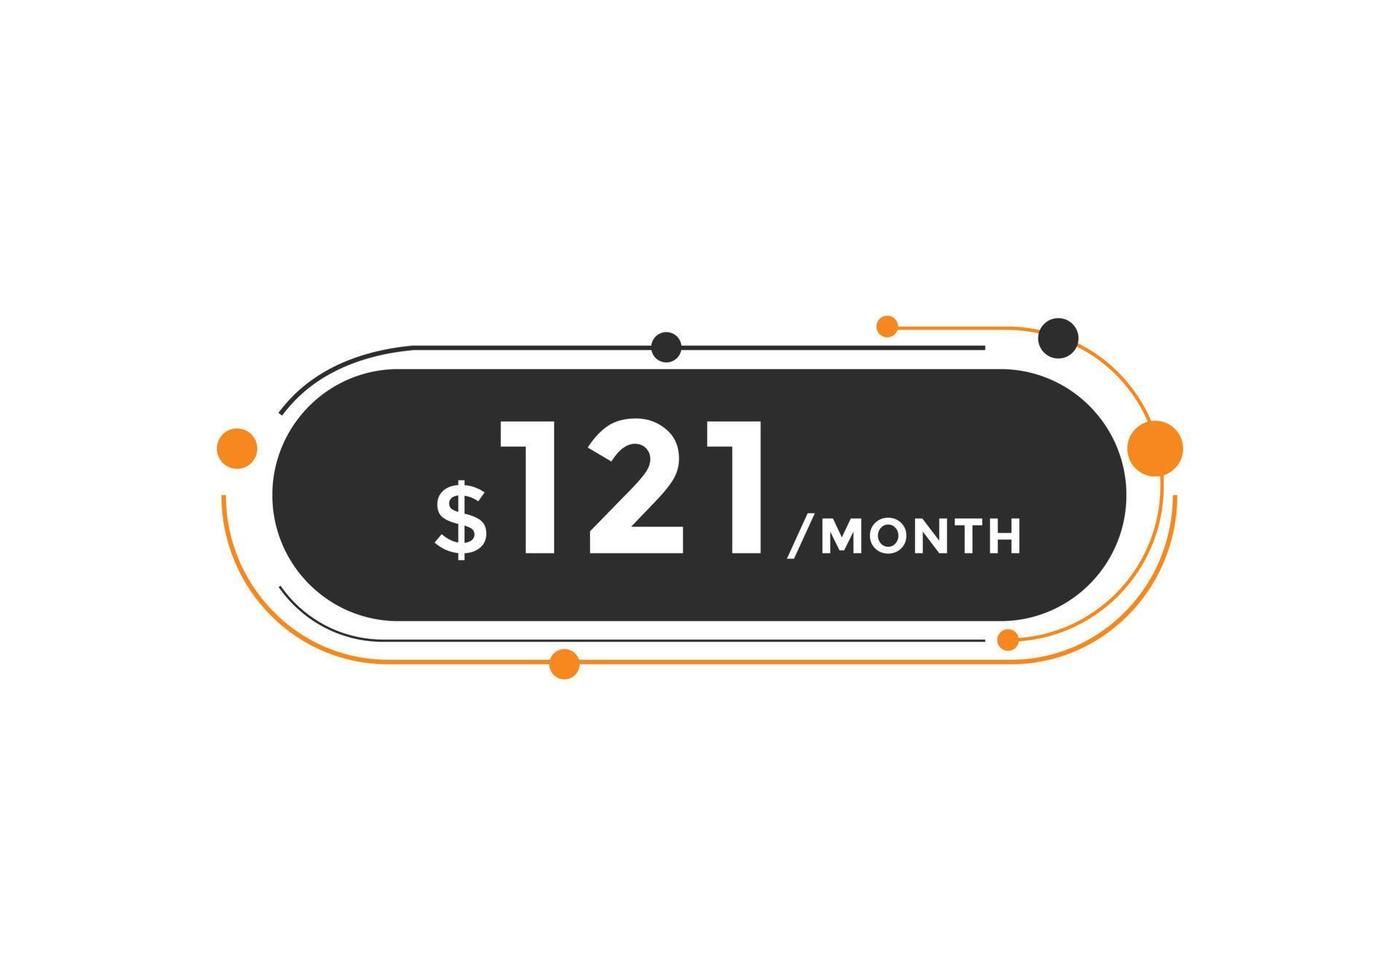 121 USD Dollar Month sale promotion Banner. Special offer, 121 dollar month price tag, shop now button. Business or shopping promotion marketing concept vector